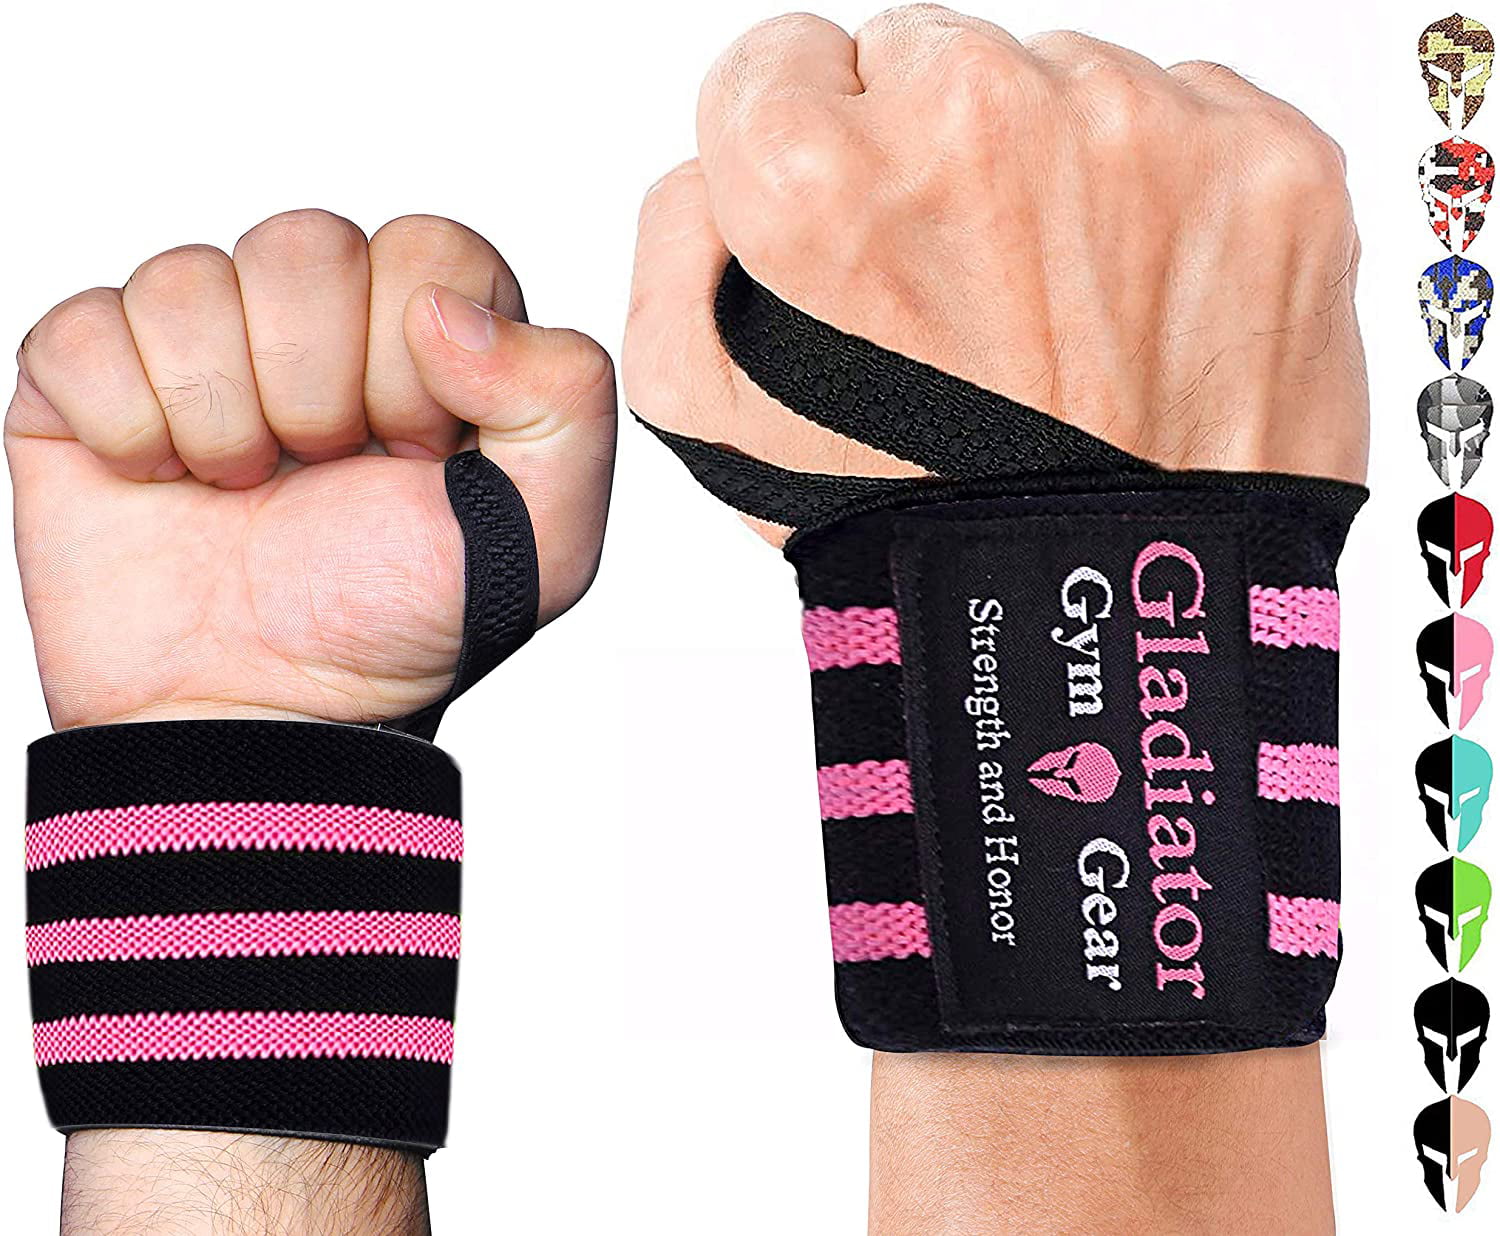 Weight Lifting Wrist Support Elasticated Gym Workout Cotton Bandage Straps Pink 